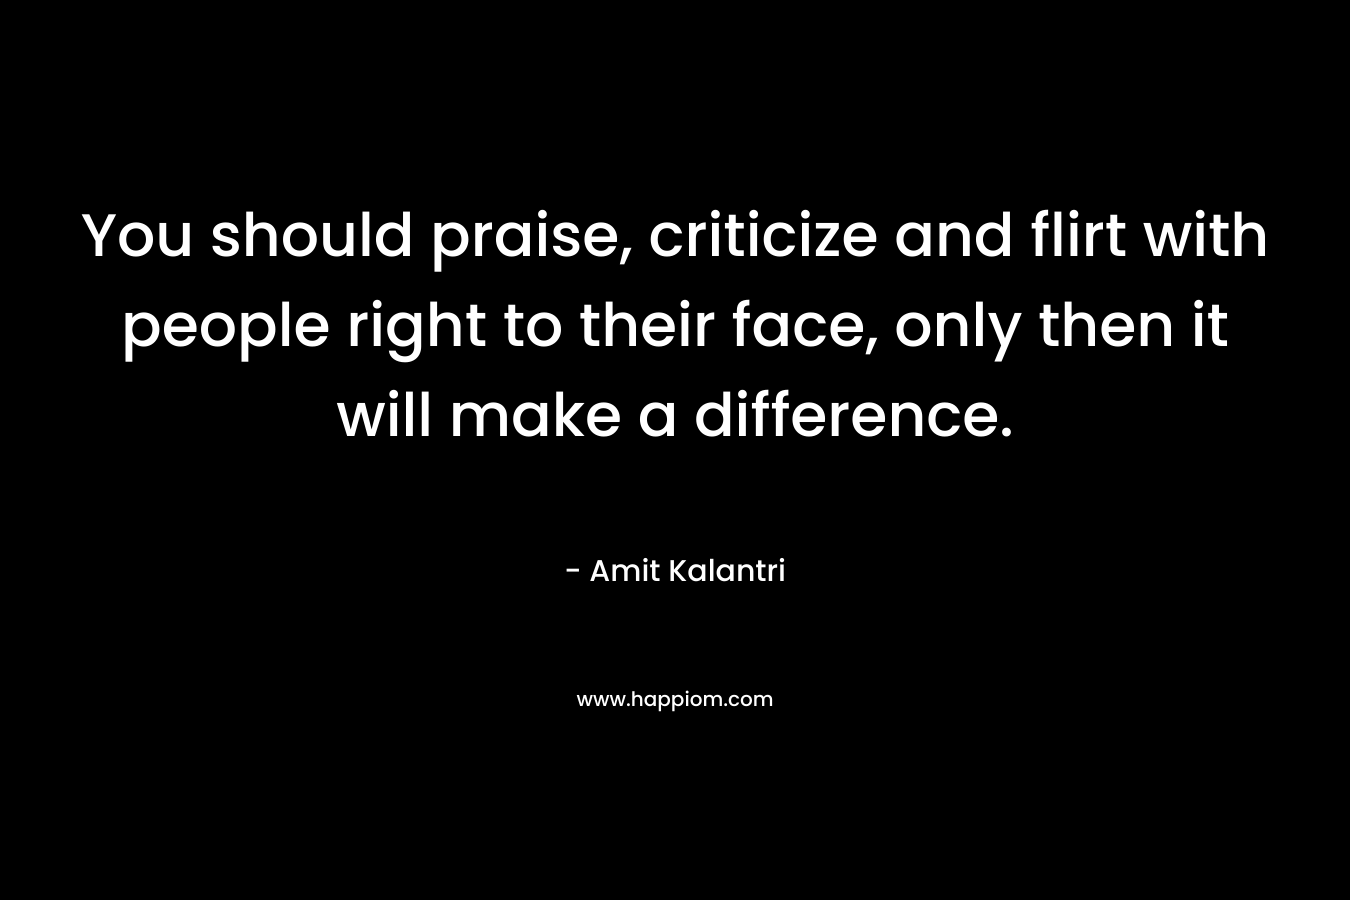 You should praise, criticize and flirt with people right to their face, only then it will make a difference. – Amit Kalantri